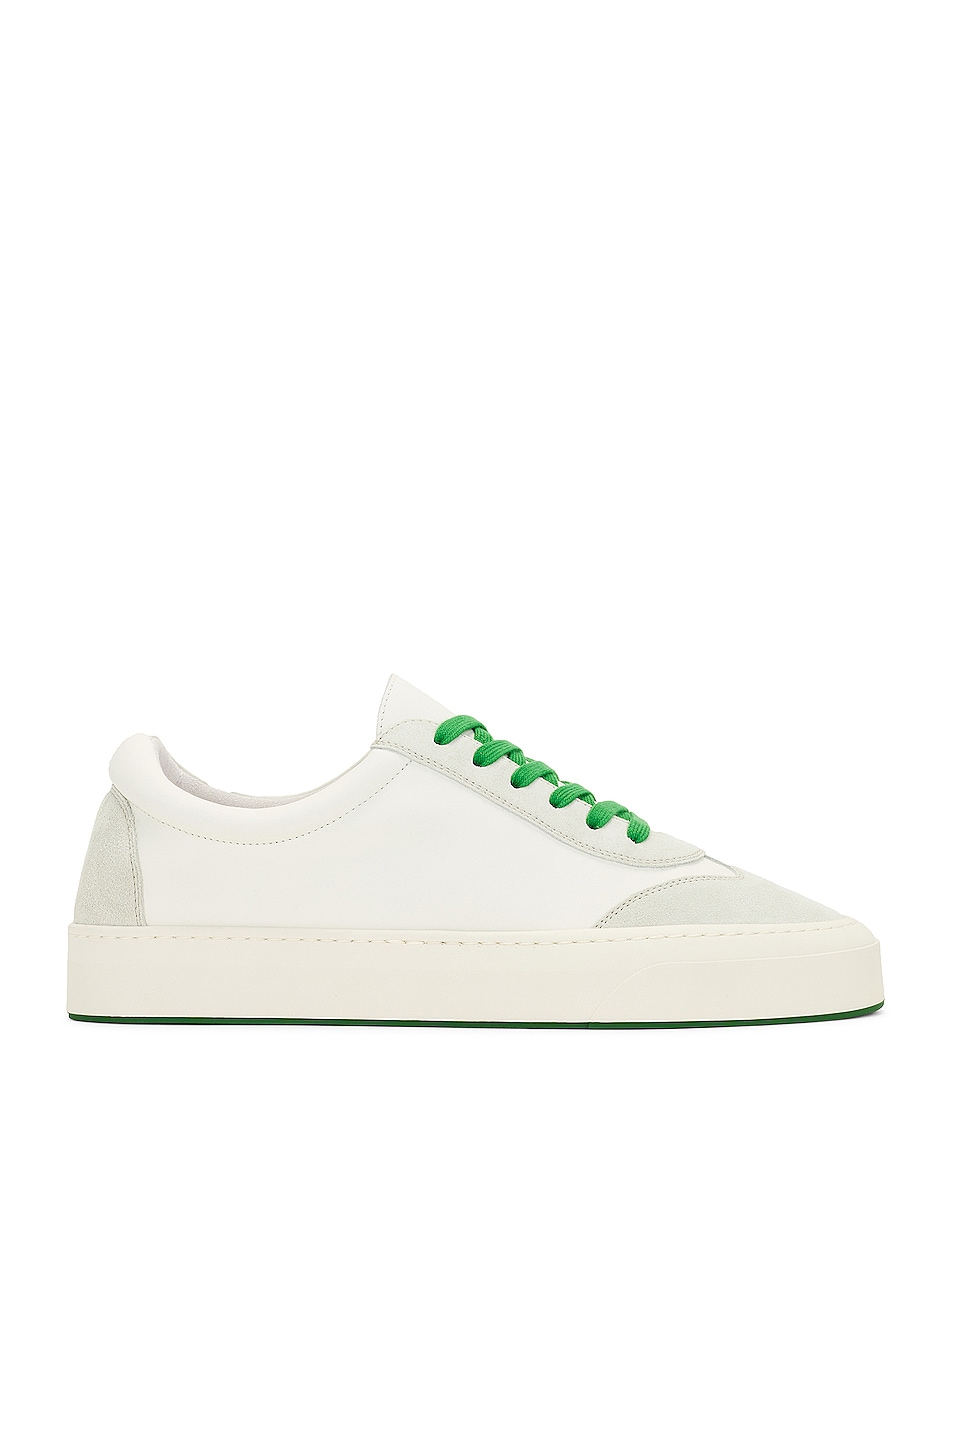 Image 1 of The Row Marley Lace Up Sneaker in Milk